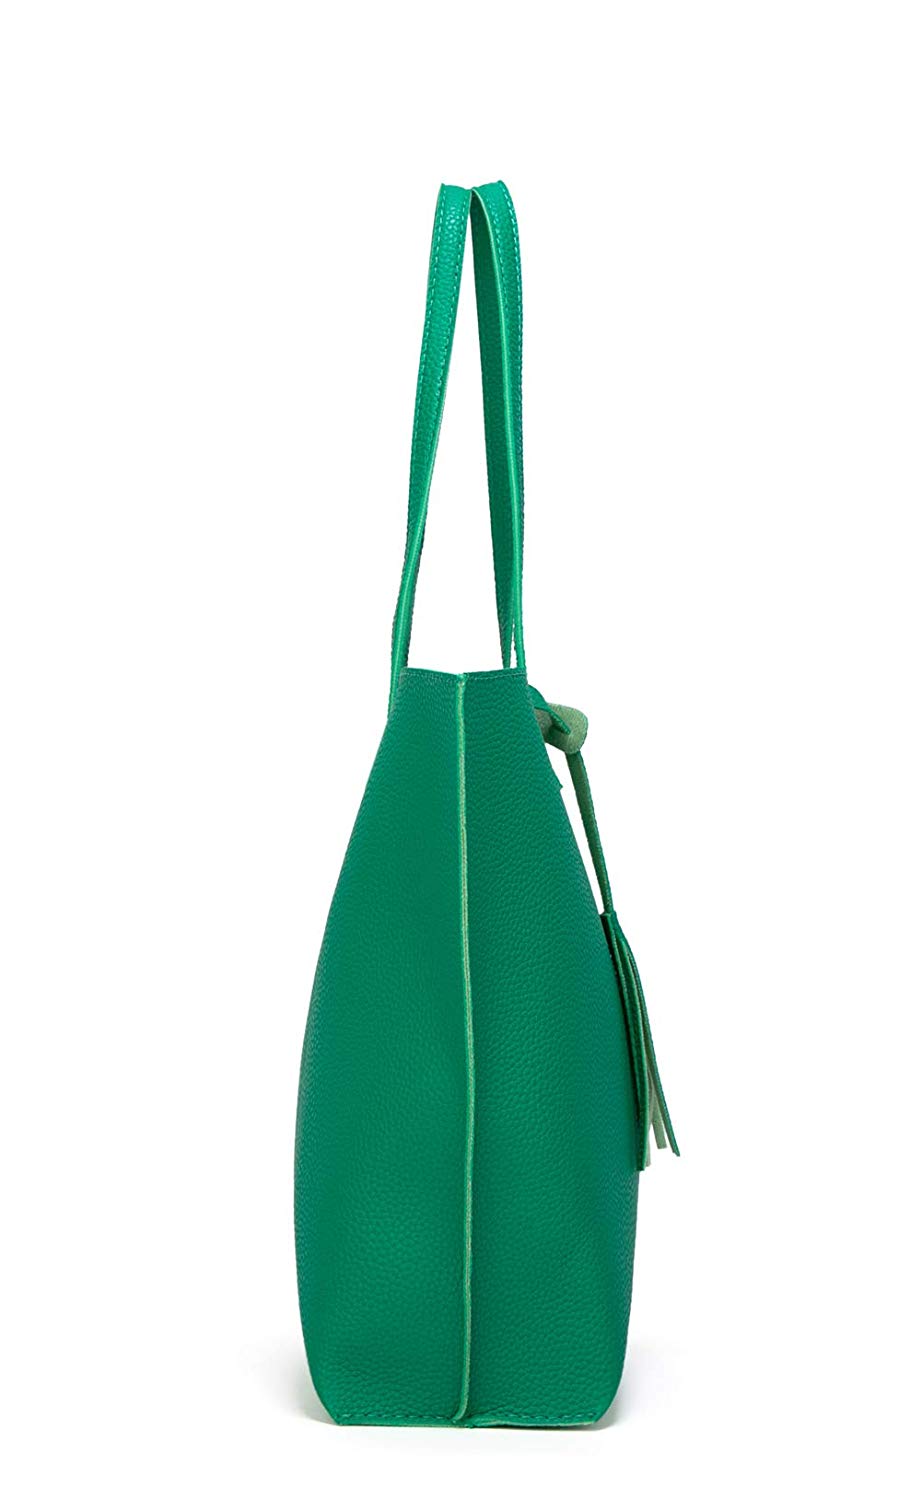 Women&#39;s Soft Faux Leather Tote Shoulder Bag from Dreubea,, Green, Size Medium | eBay